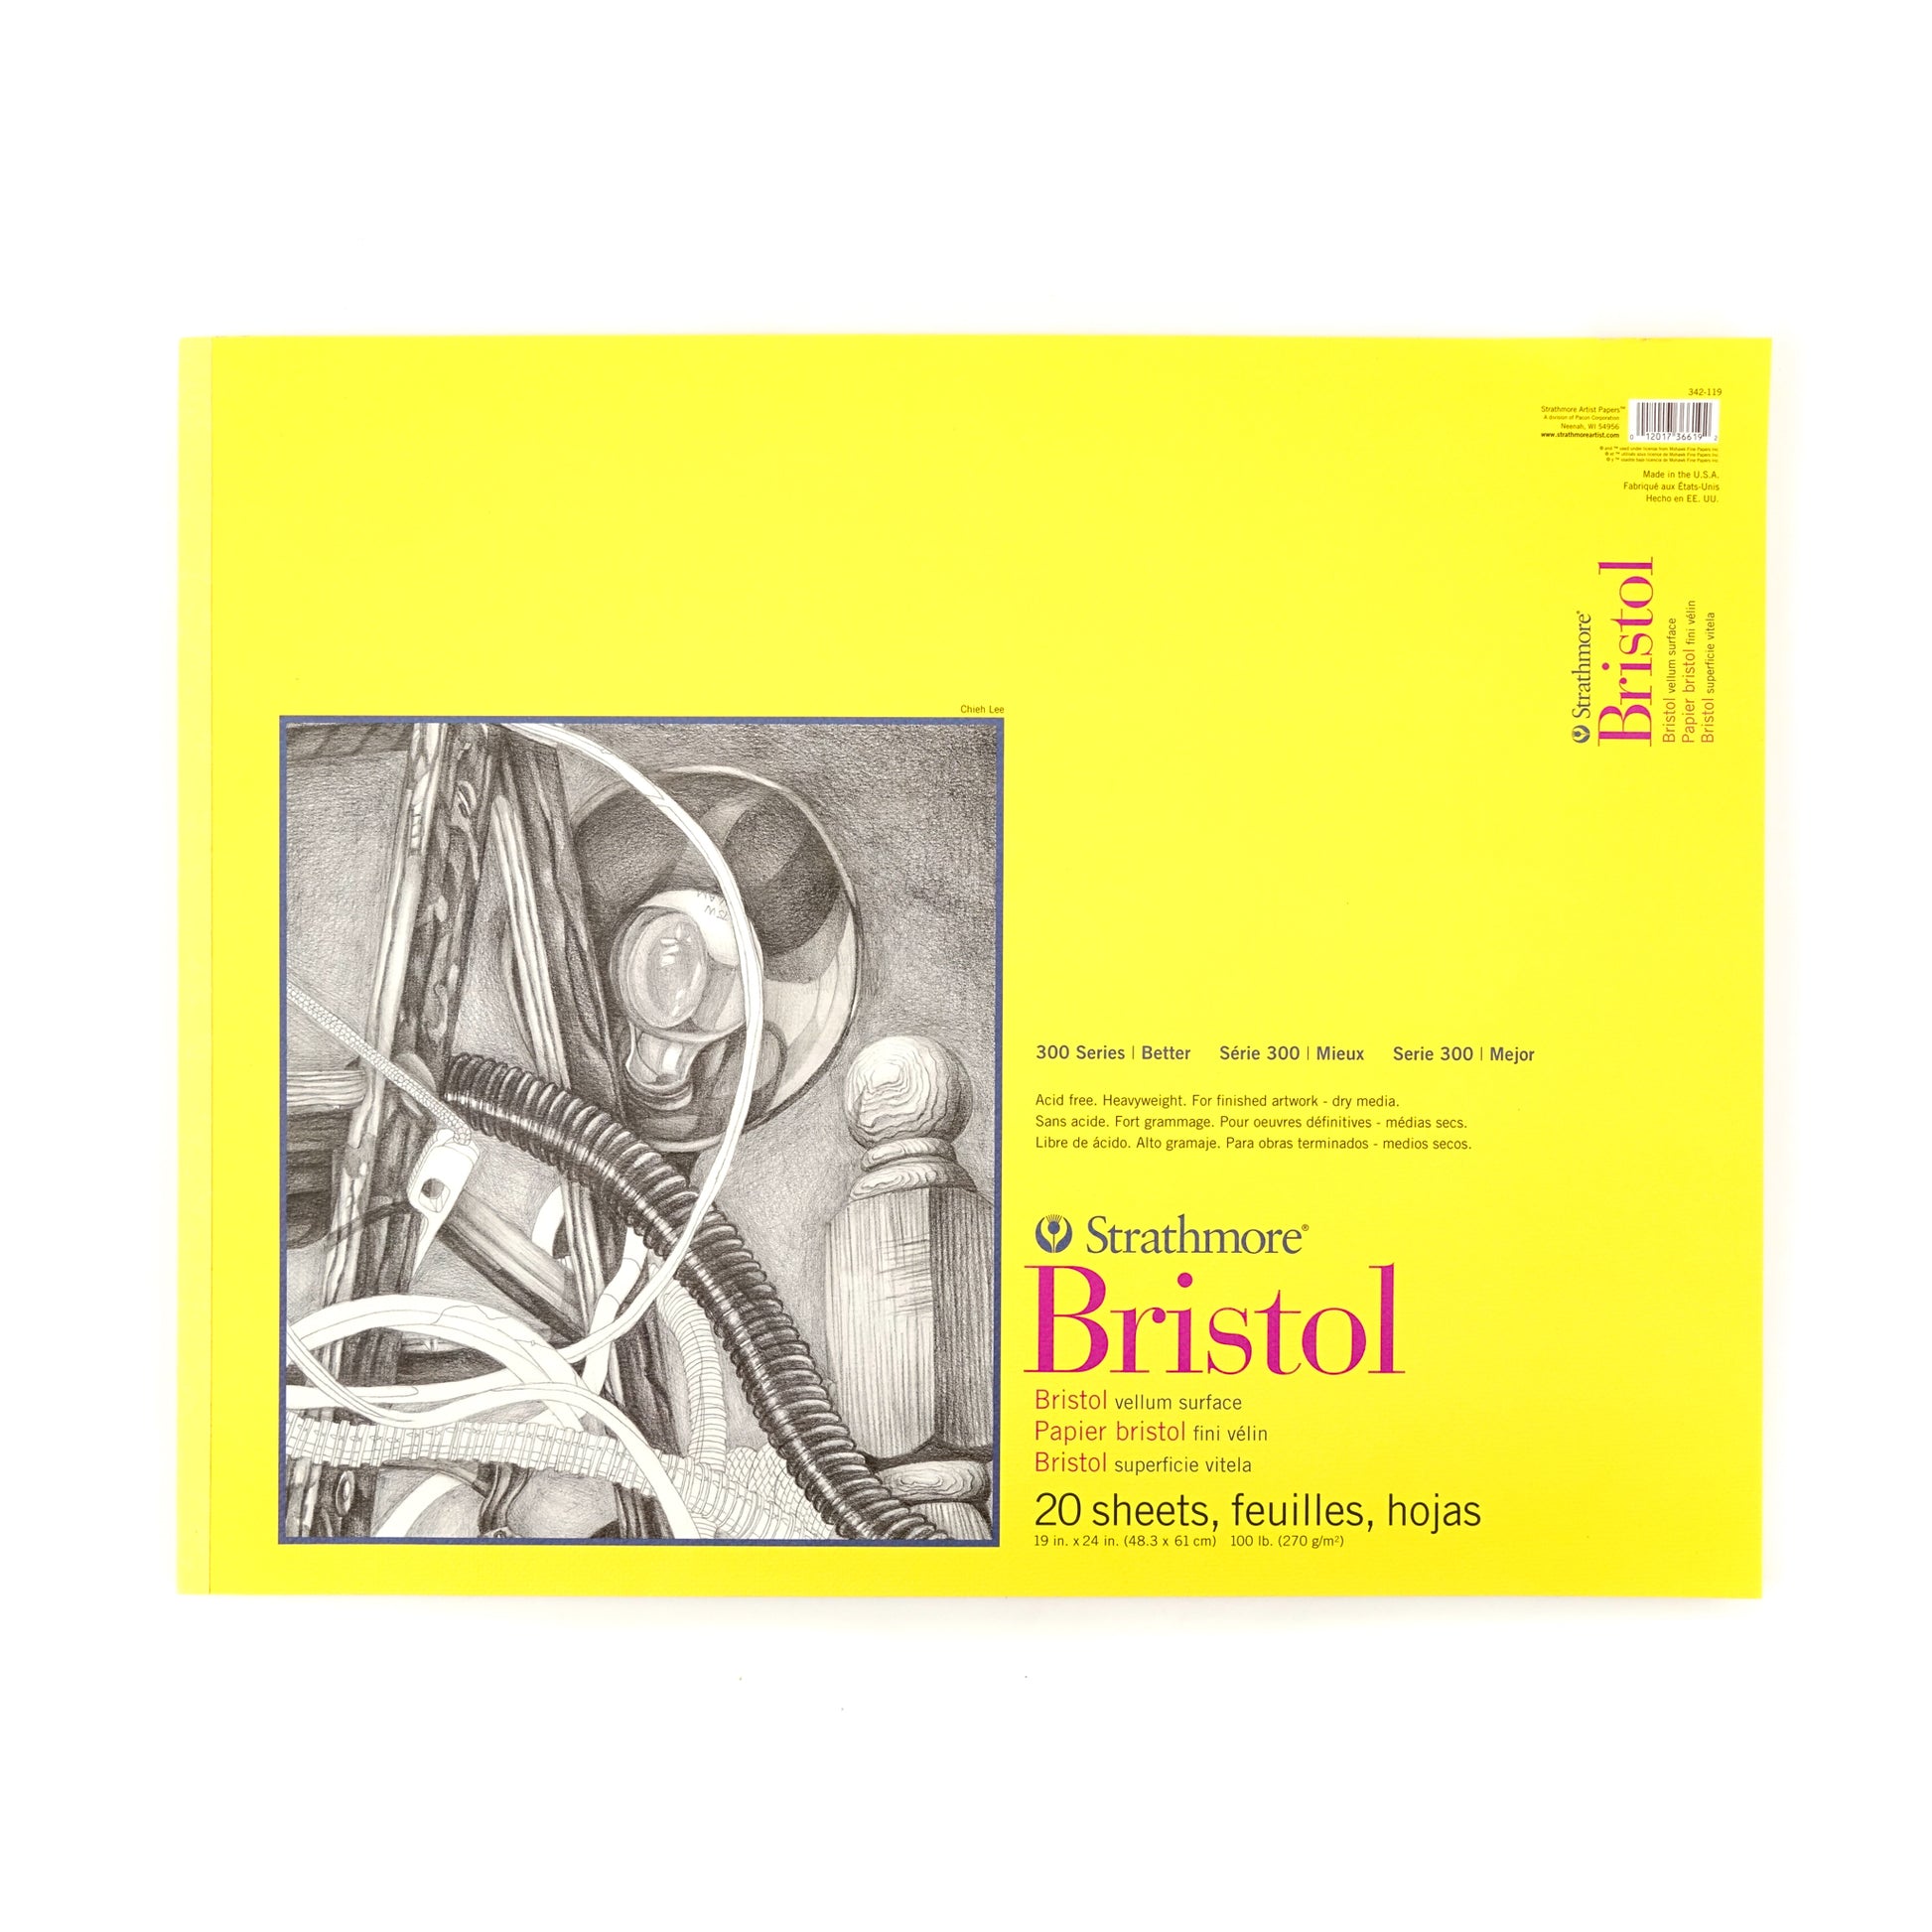 Strathmore 300 Series Bristol Paper Pad - Vellum Surface - 19 x 24 inches by Strathmore - K. A. Artist Shop